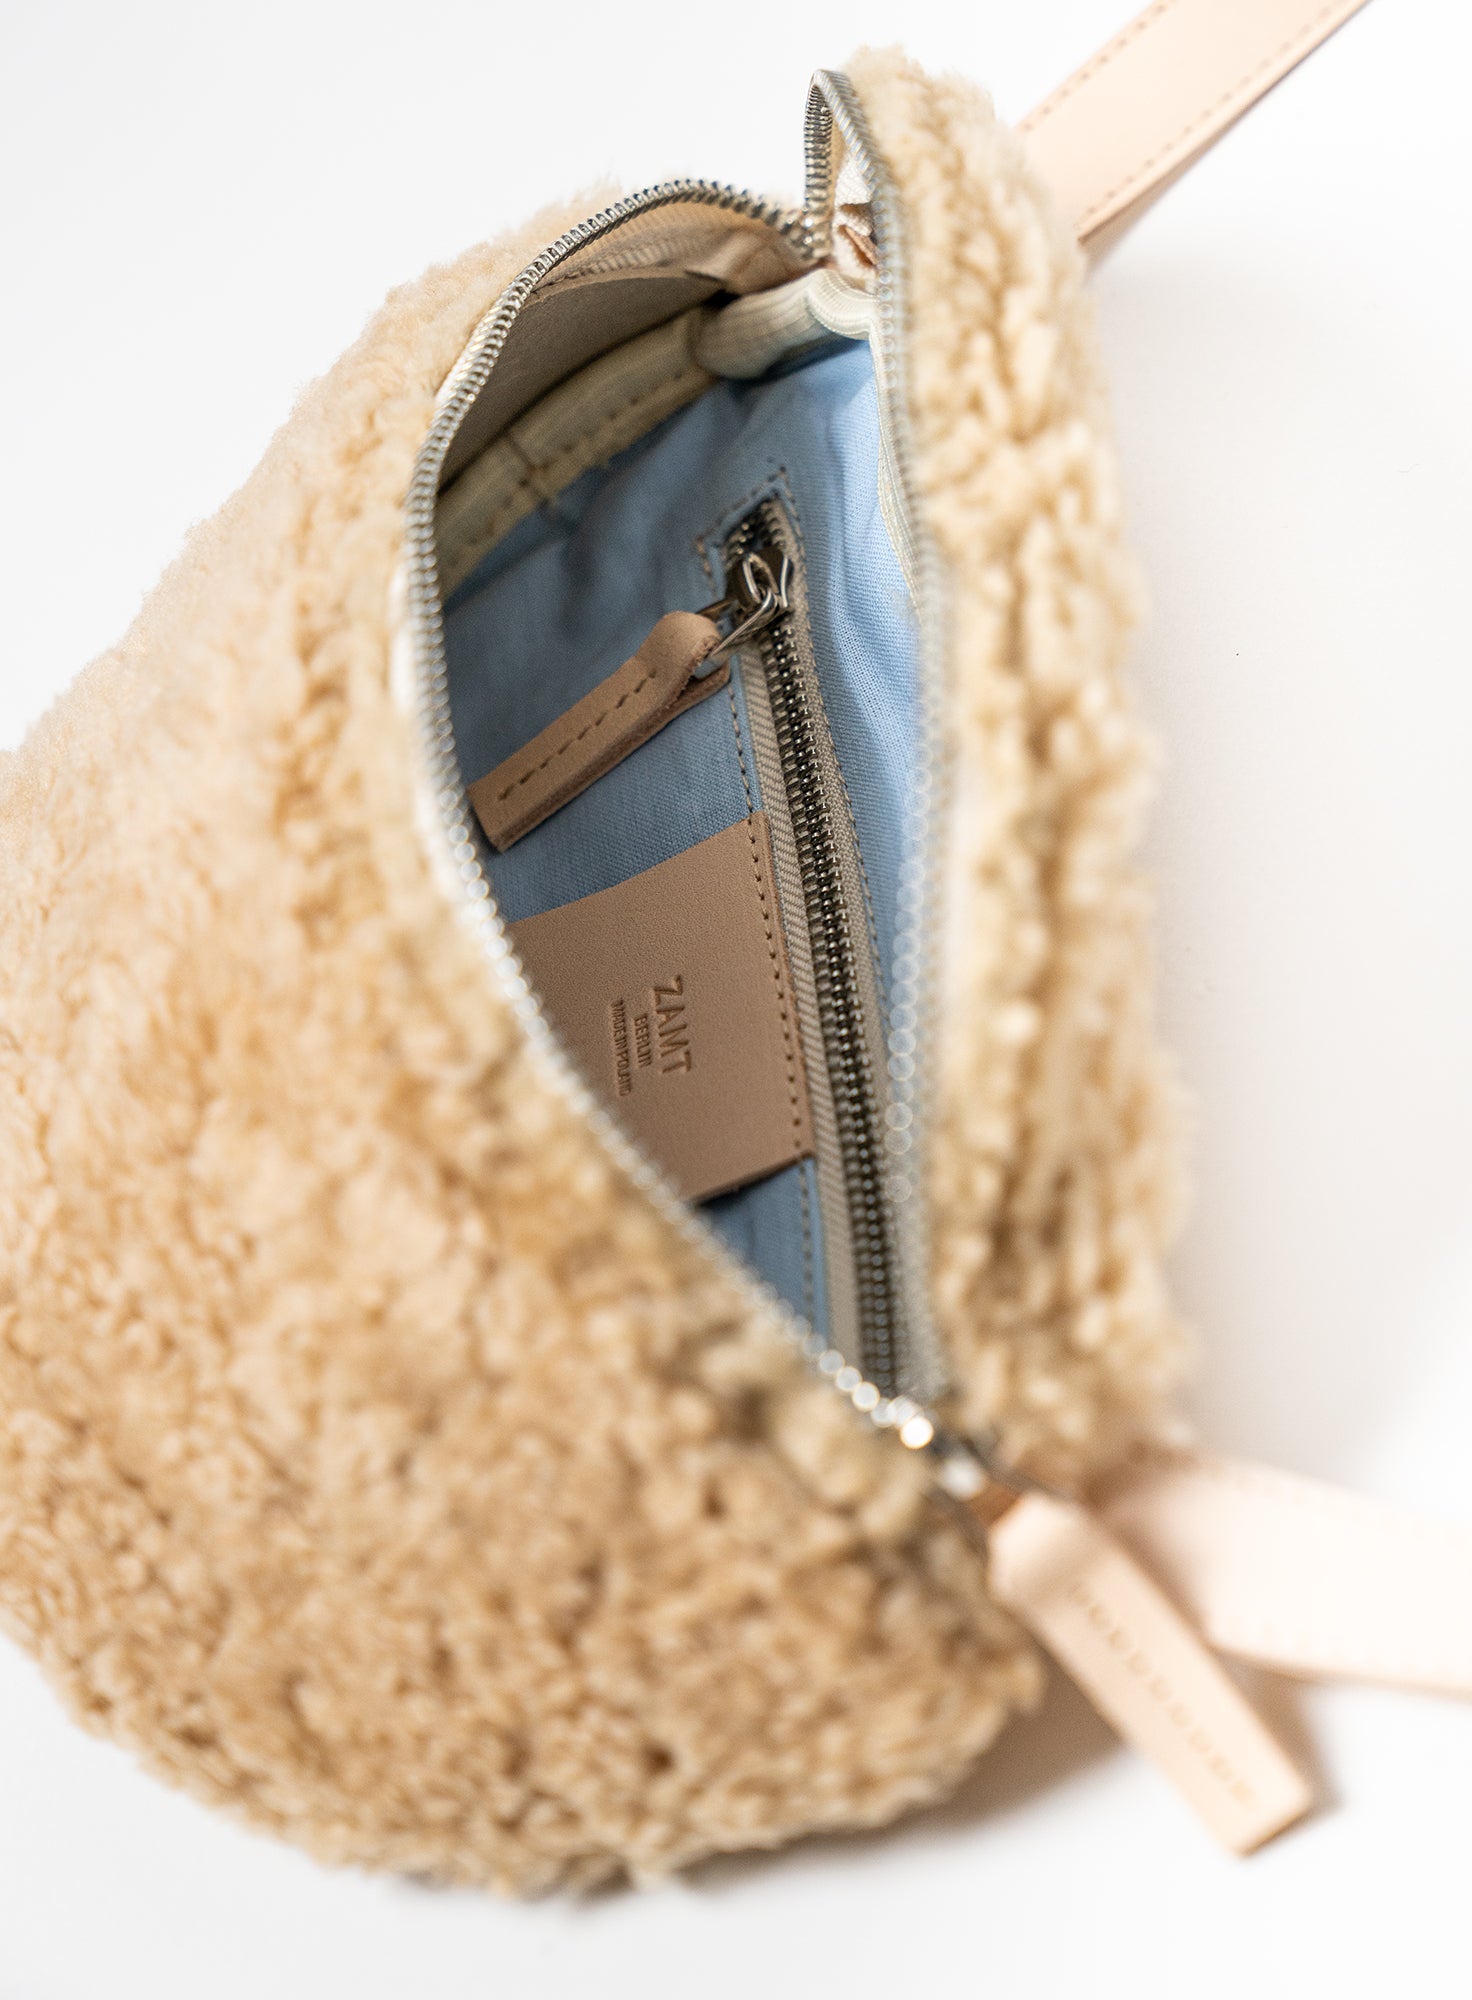 HIP_BAG_CAN_Shearling_Natural_Designed_in_Berlin_Made_to_last_Handmade_in_Poland.